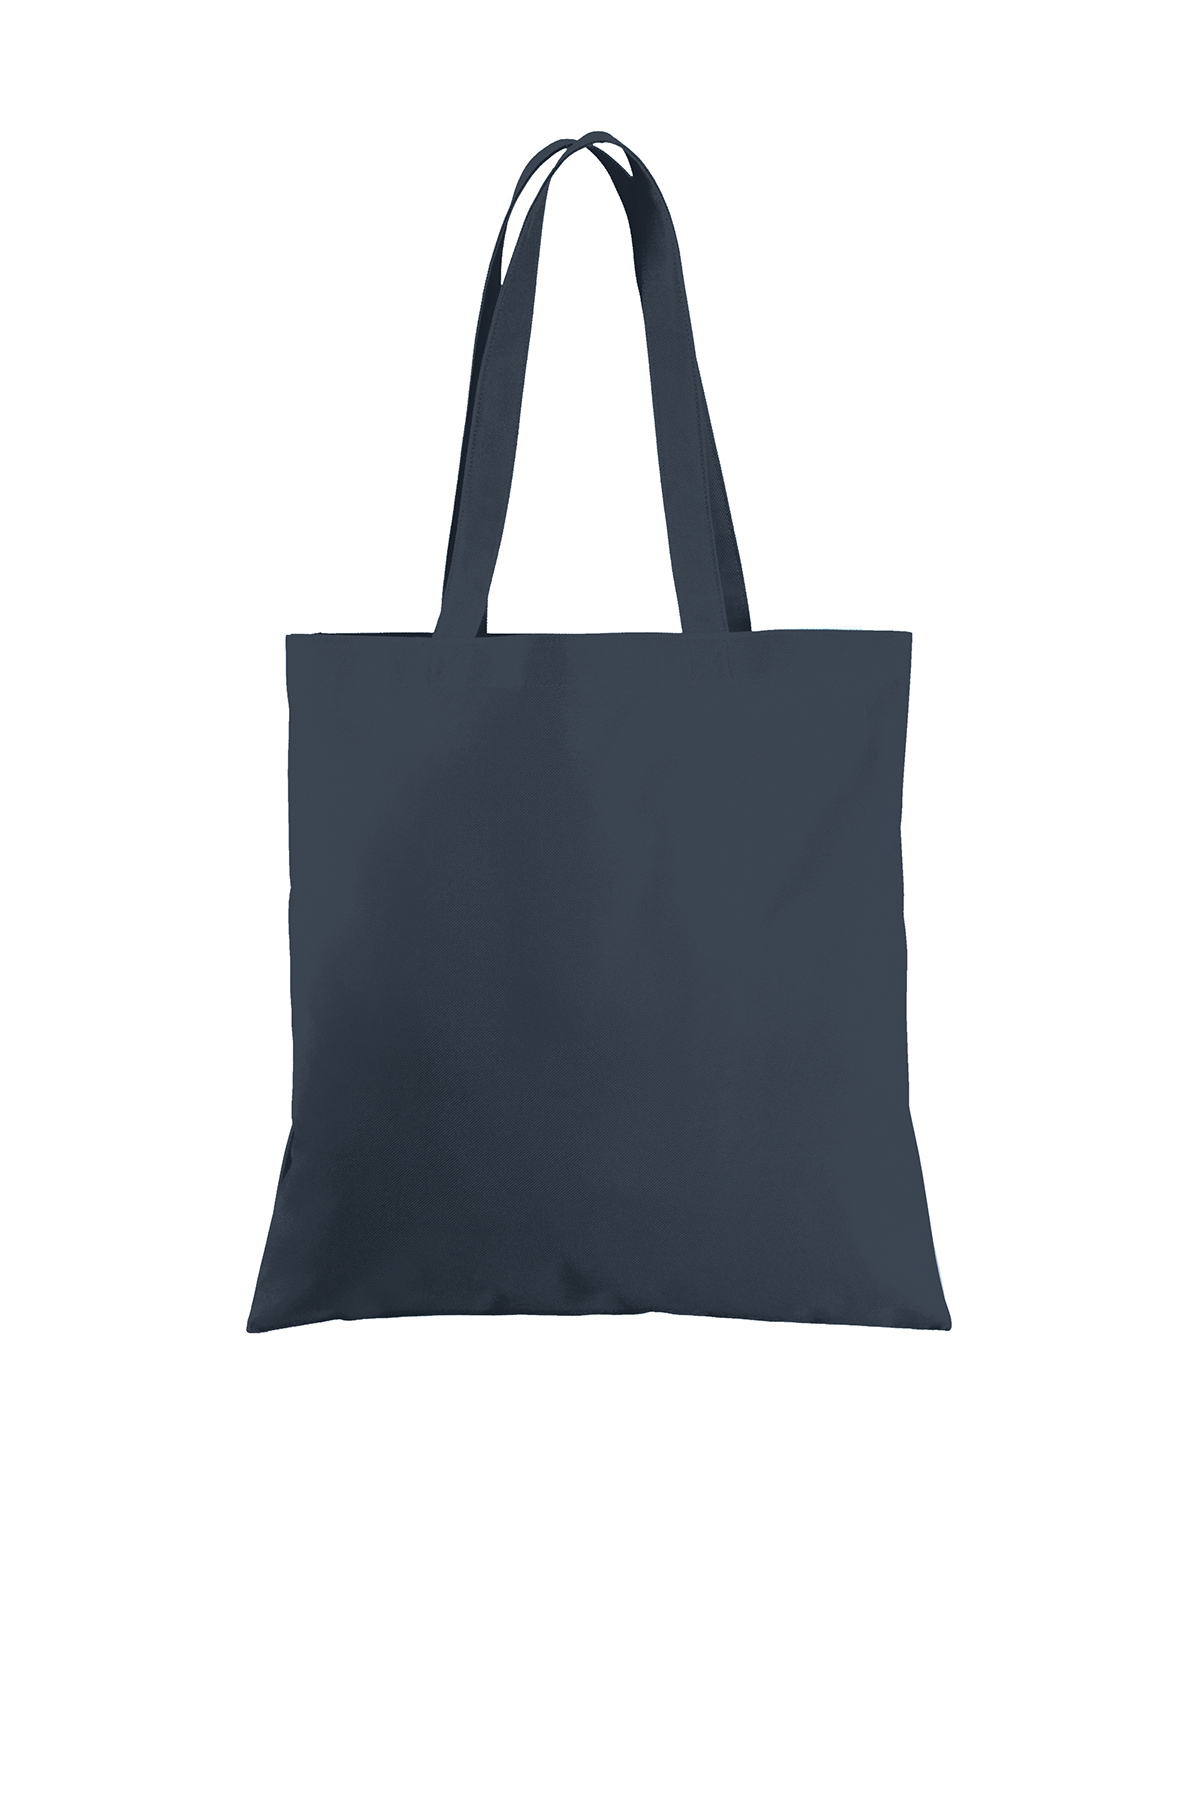 Canvas Tote Bag Size Chart Port Authority B150 Tote Bag Mockup 